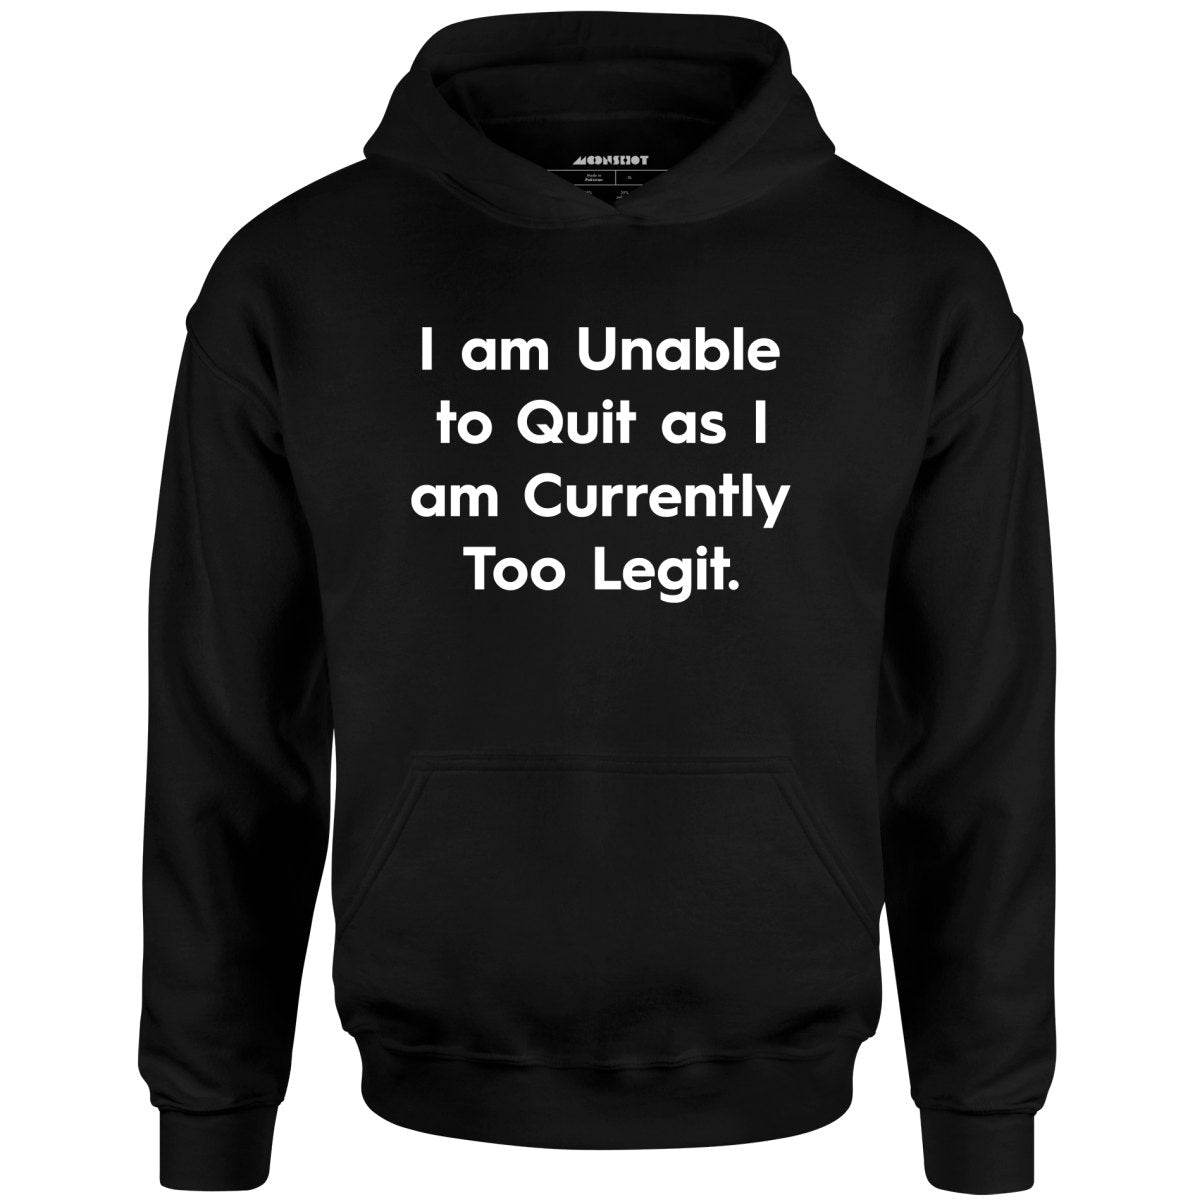 I am Unable to Quit as I am Currently Too Legit - Unisex Hoodie